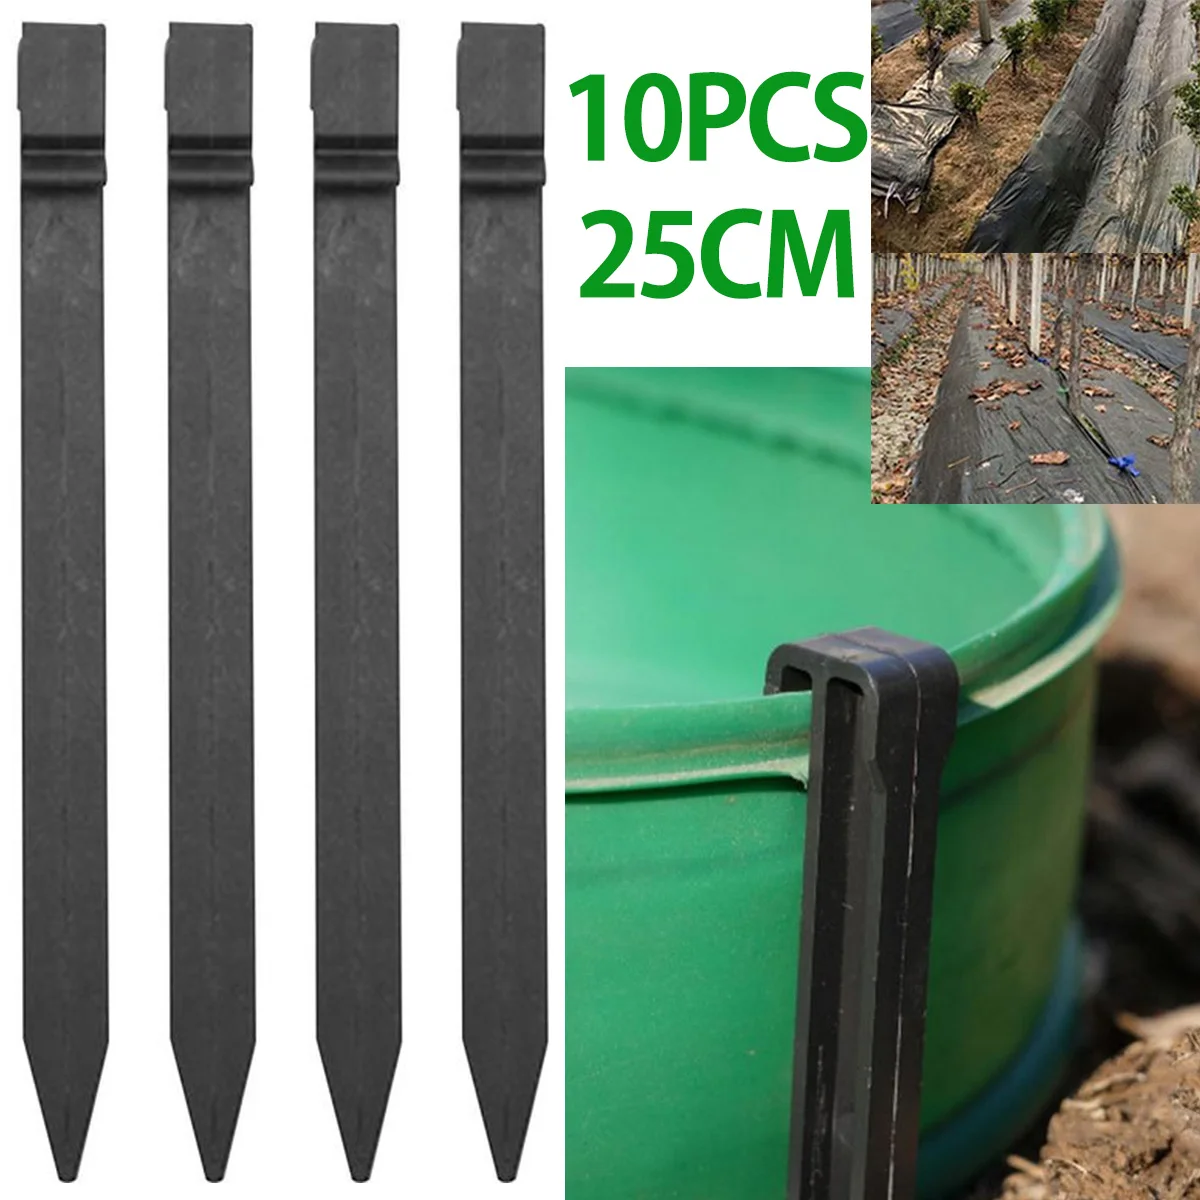 

10Pcs Garden Landscape Edging Stake 10" Plastic Lawn Edging Stake Landscape Edging Spike Garden Netting Ground Stakes Durable